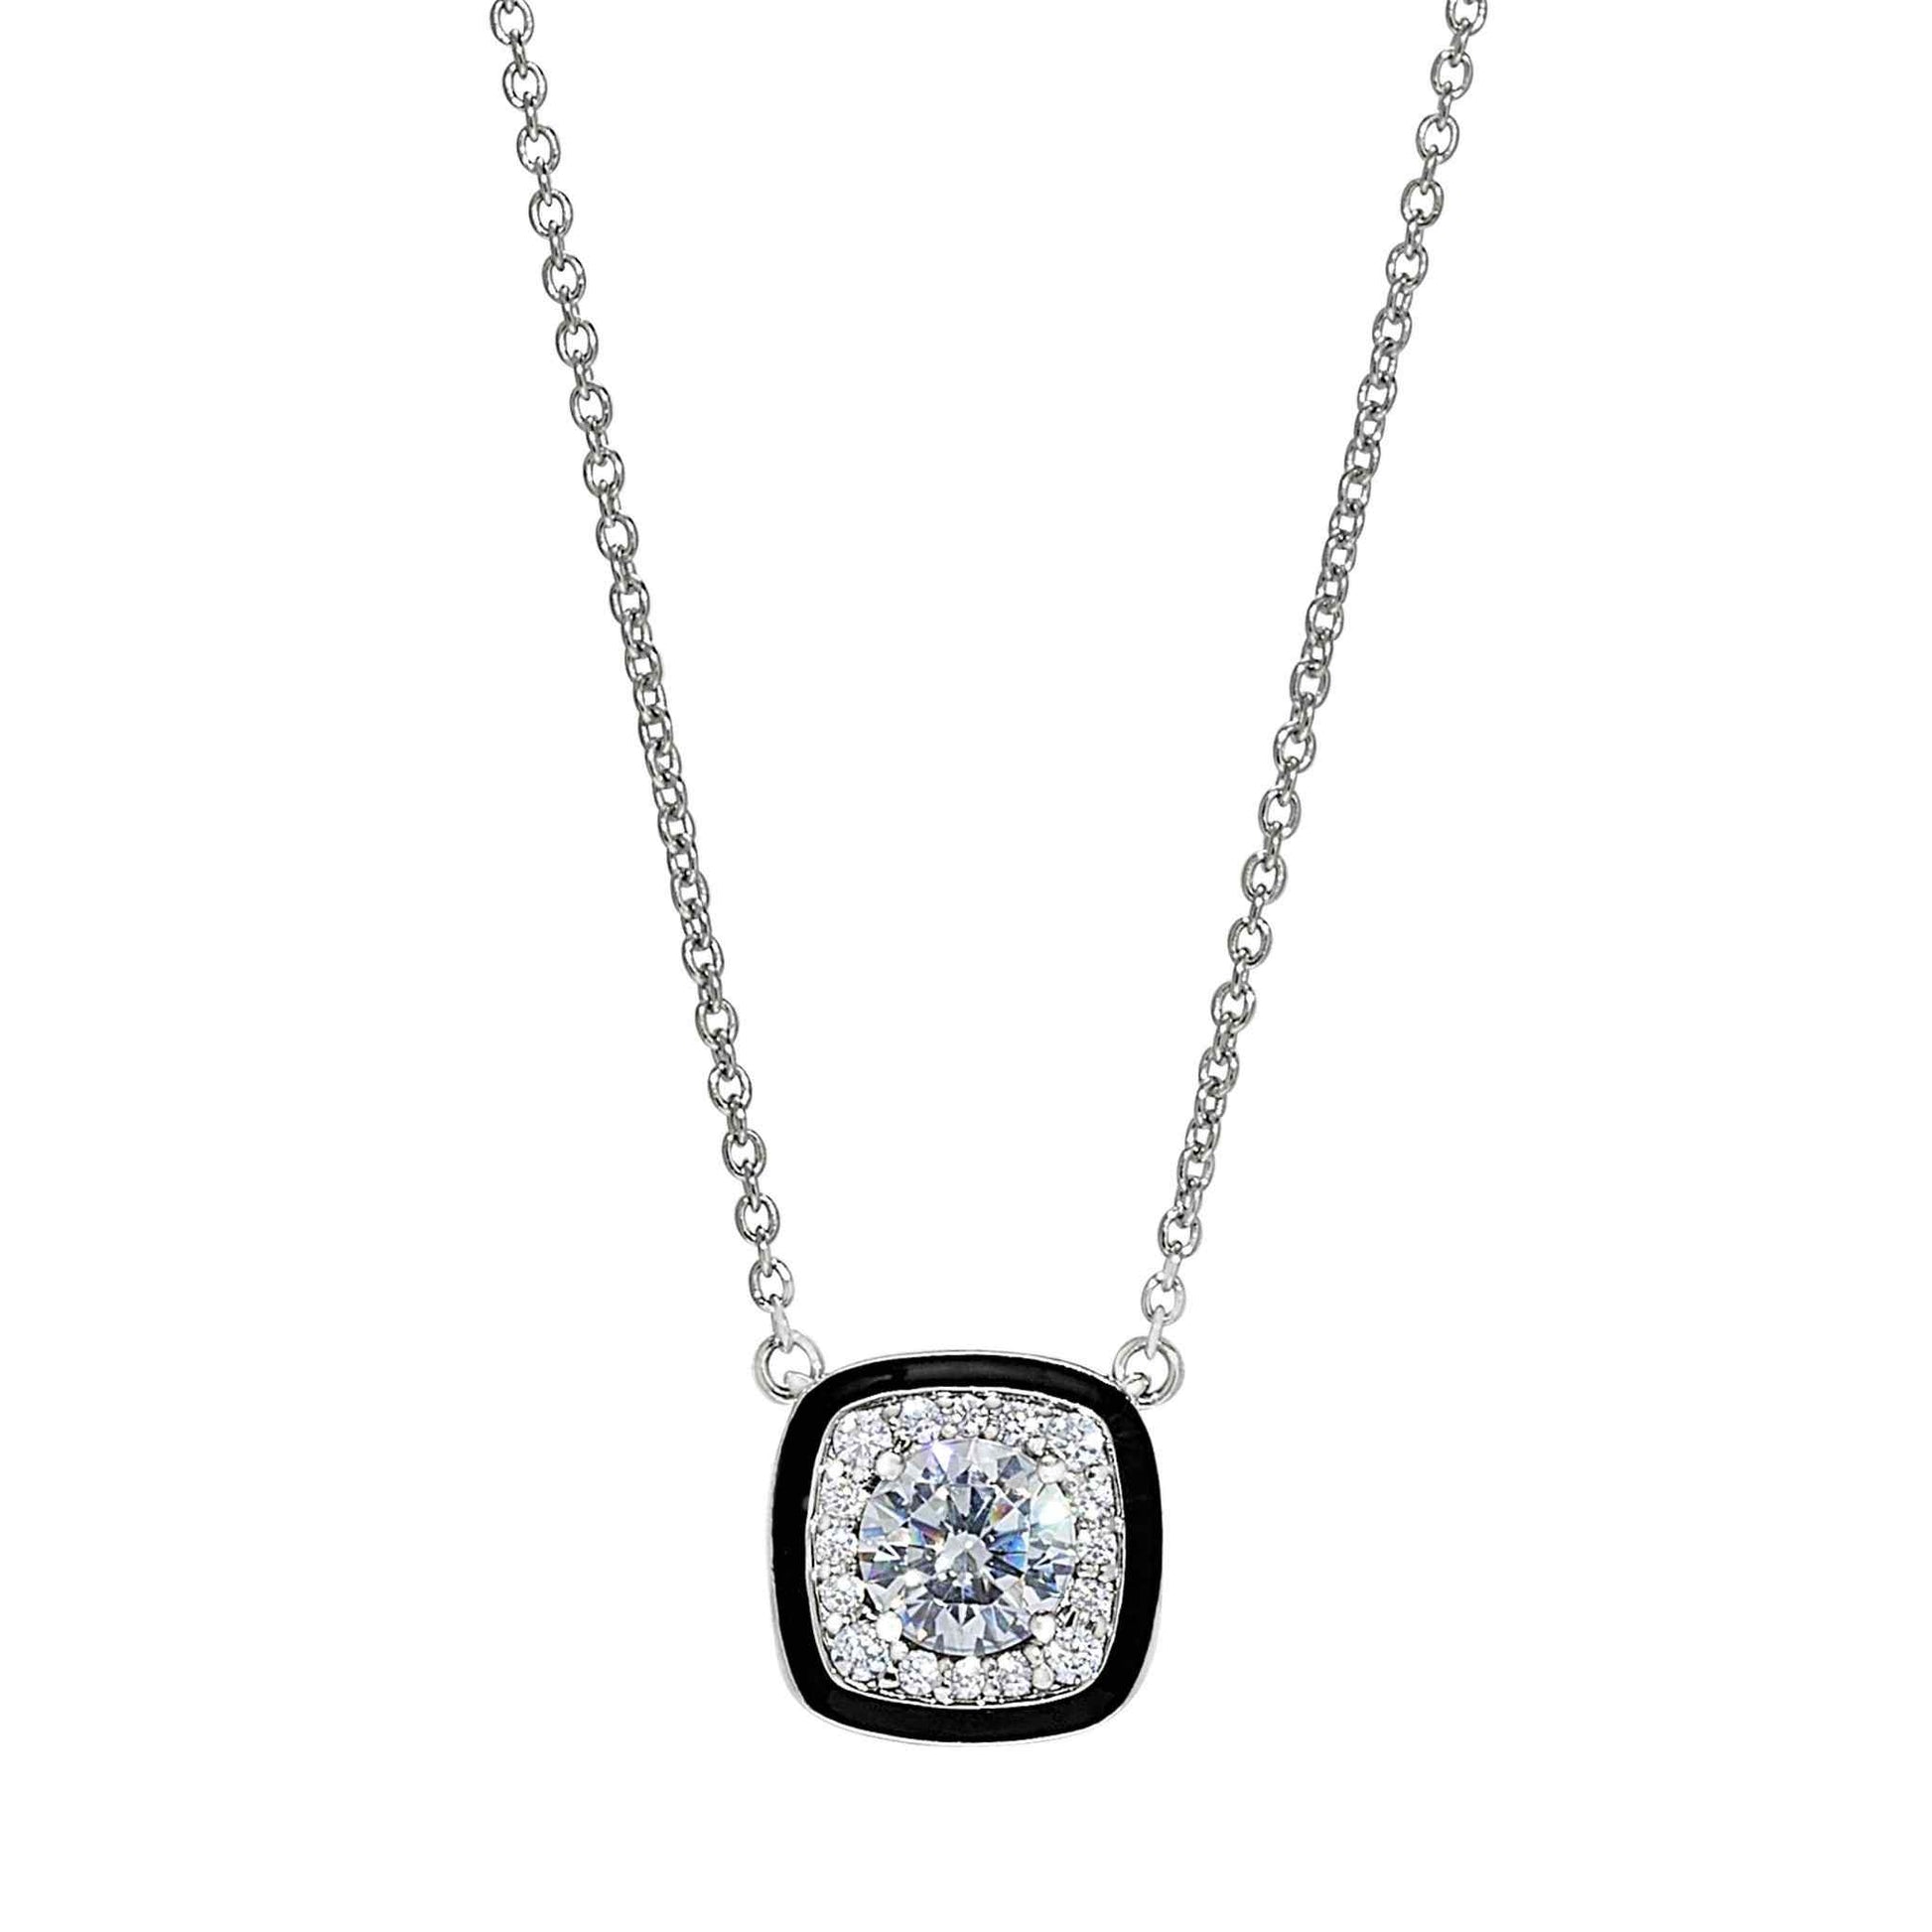 A cushion cut necklace with thin black enamel and simulated diamonds displayed on a neutral white background.